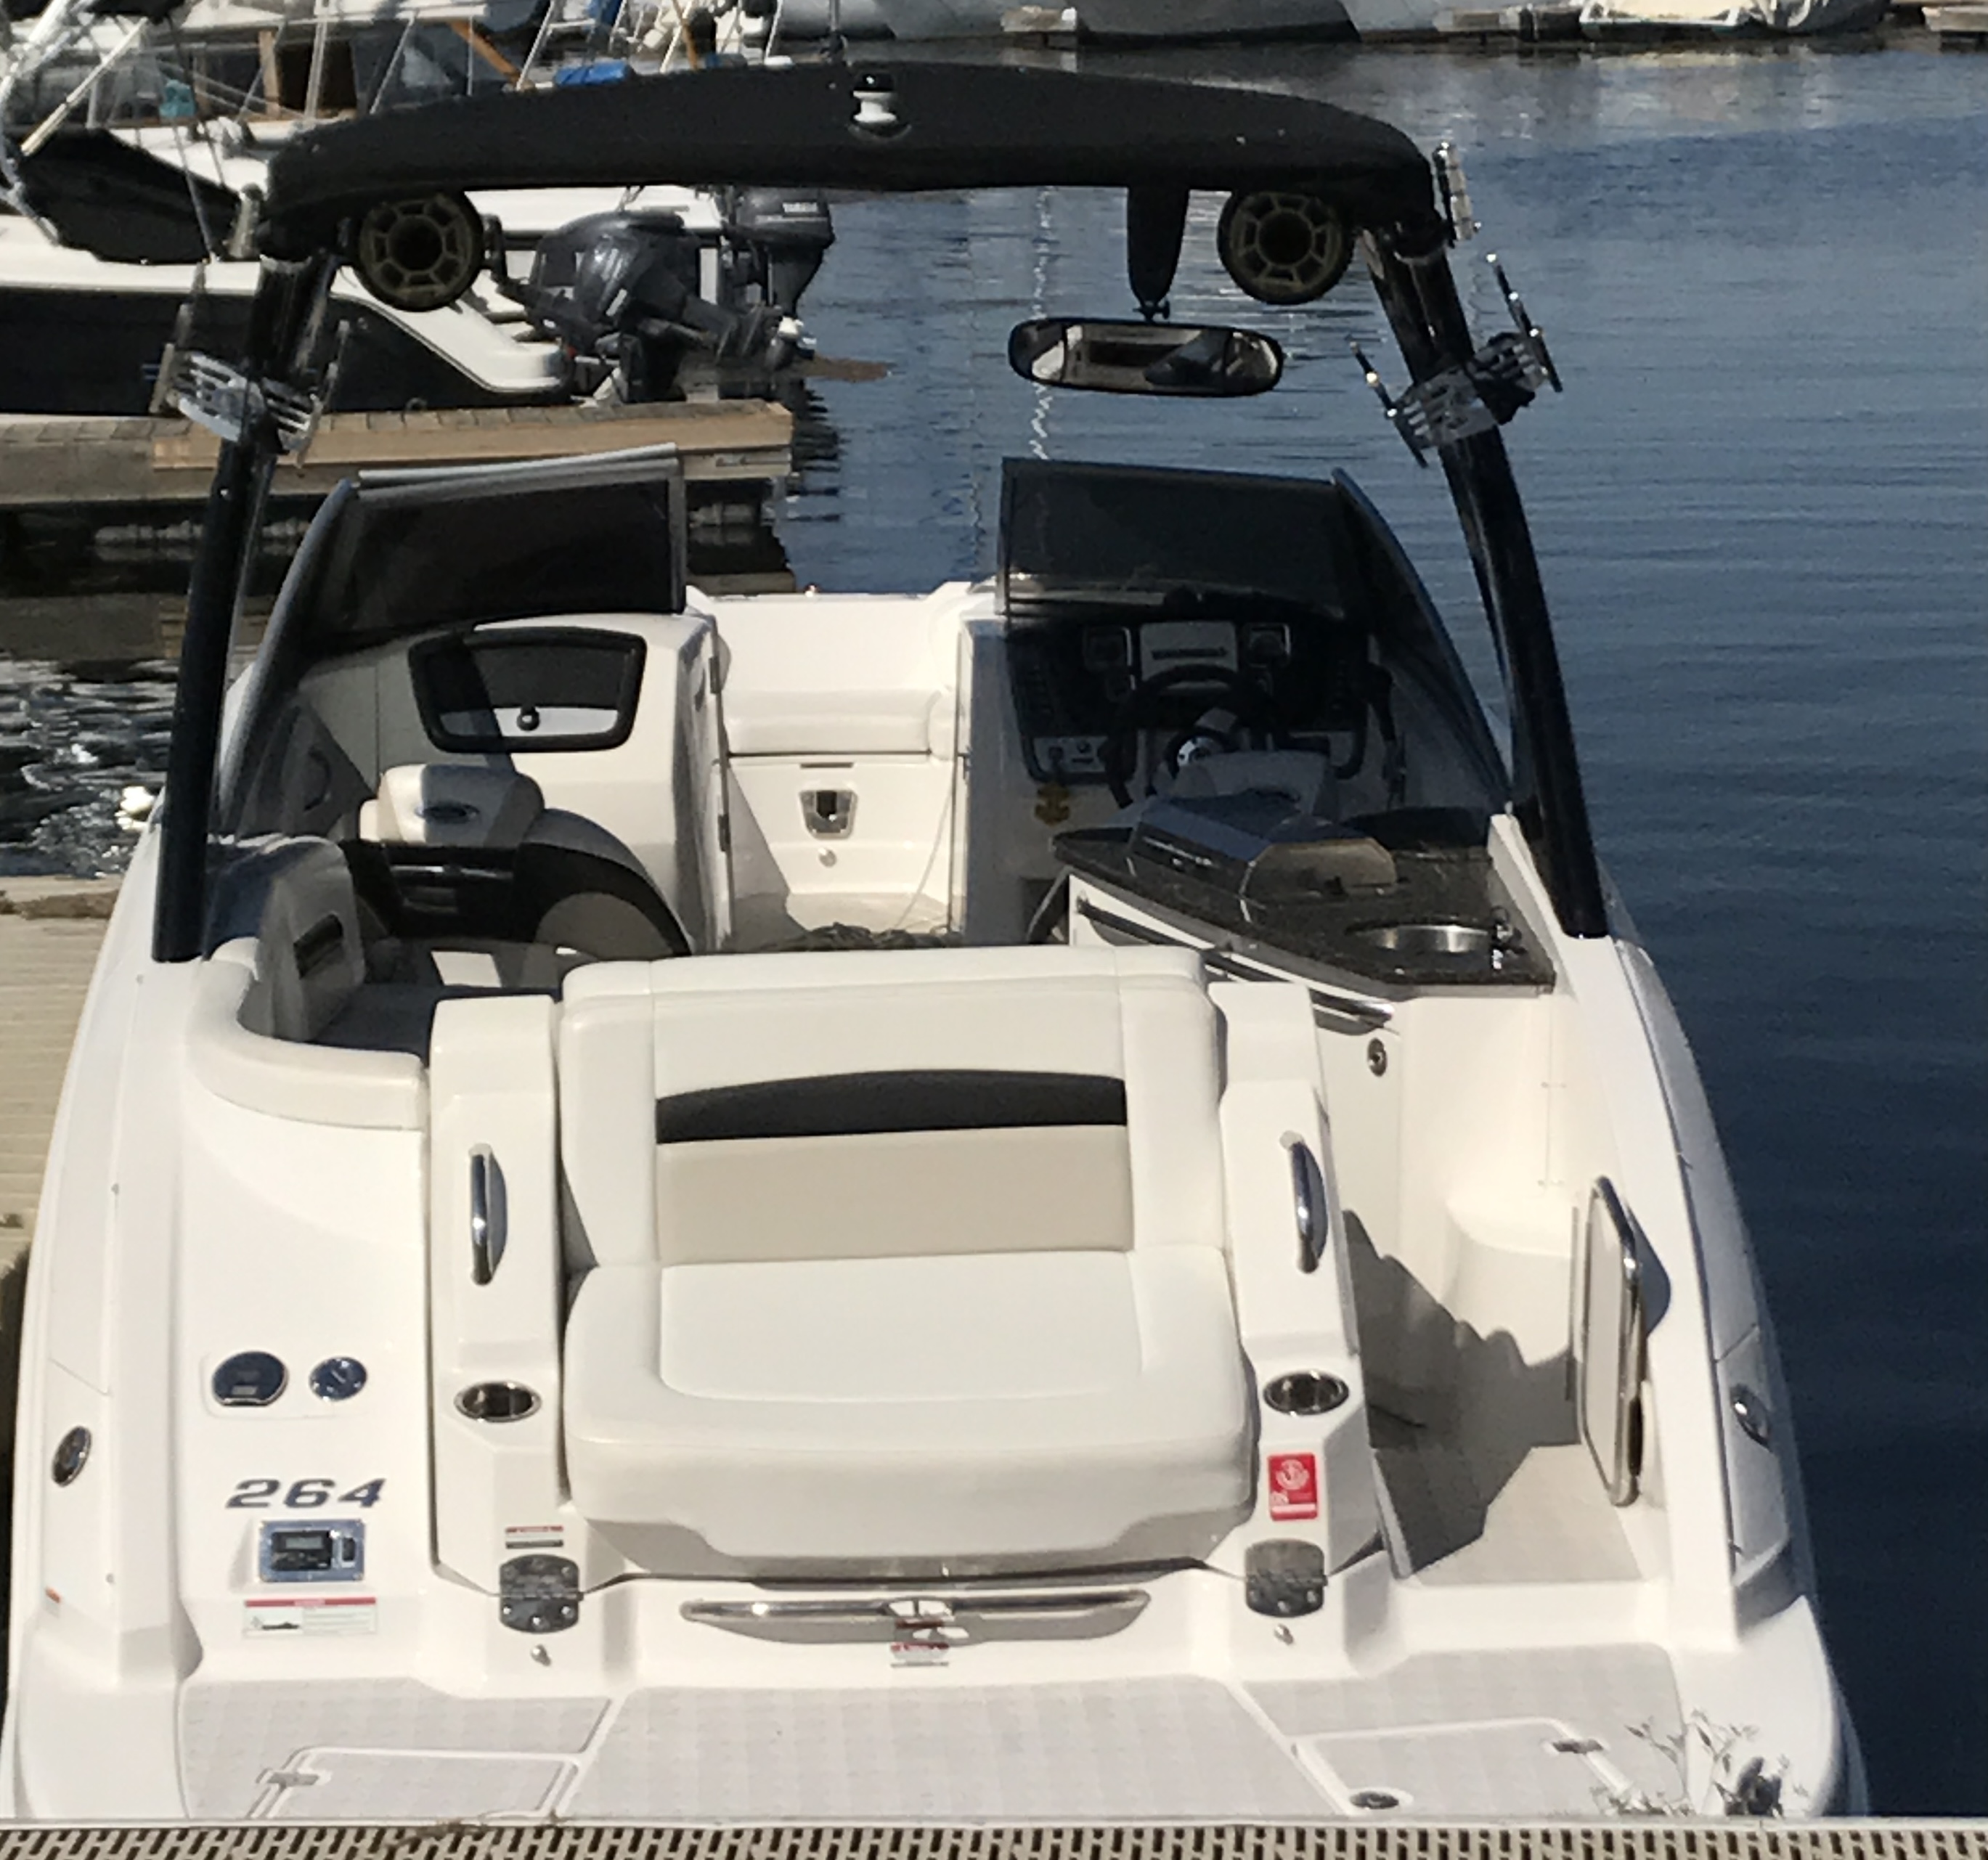 2008 Chaparral 264 Sunesta Power boat for sale in Hermiston, OR - image 3 